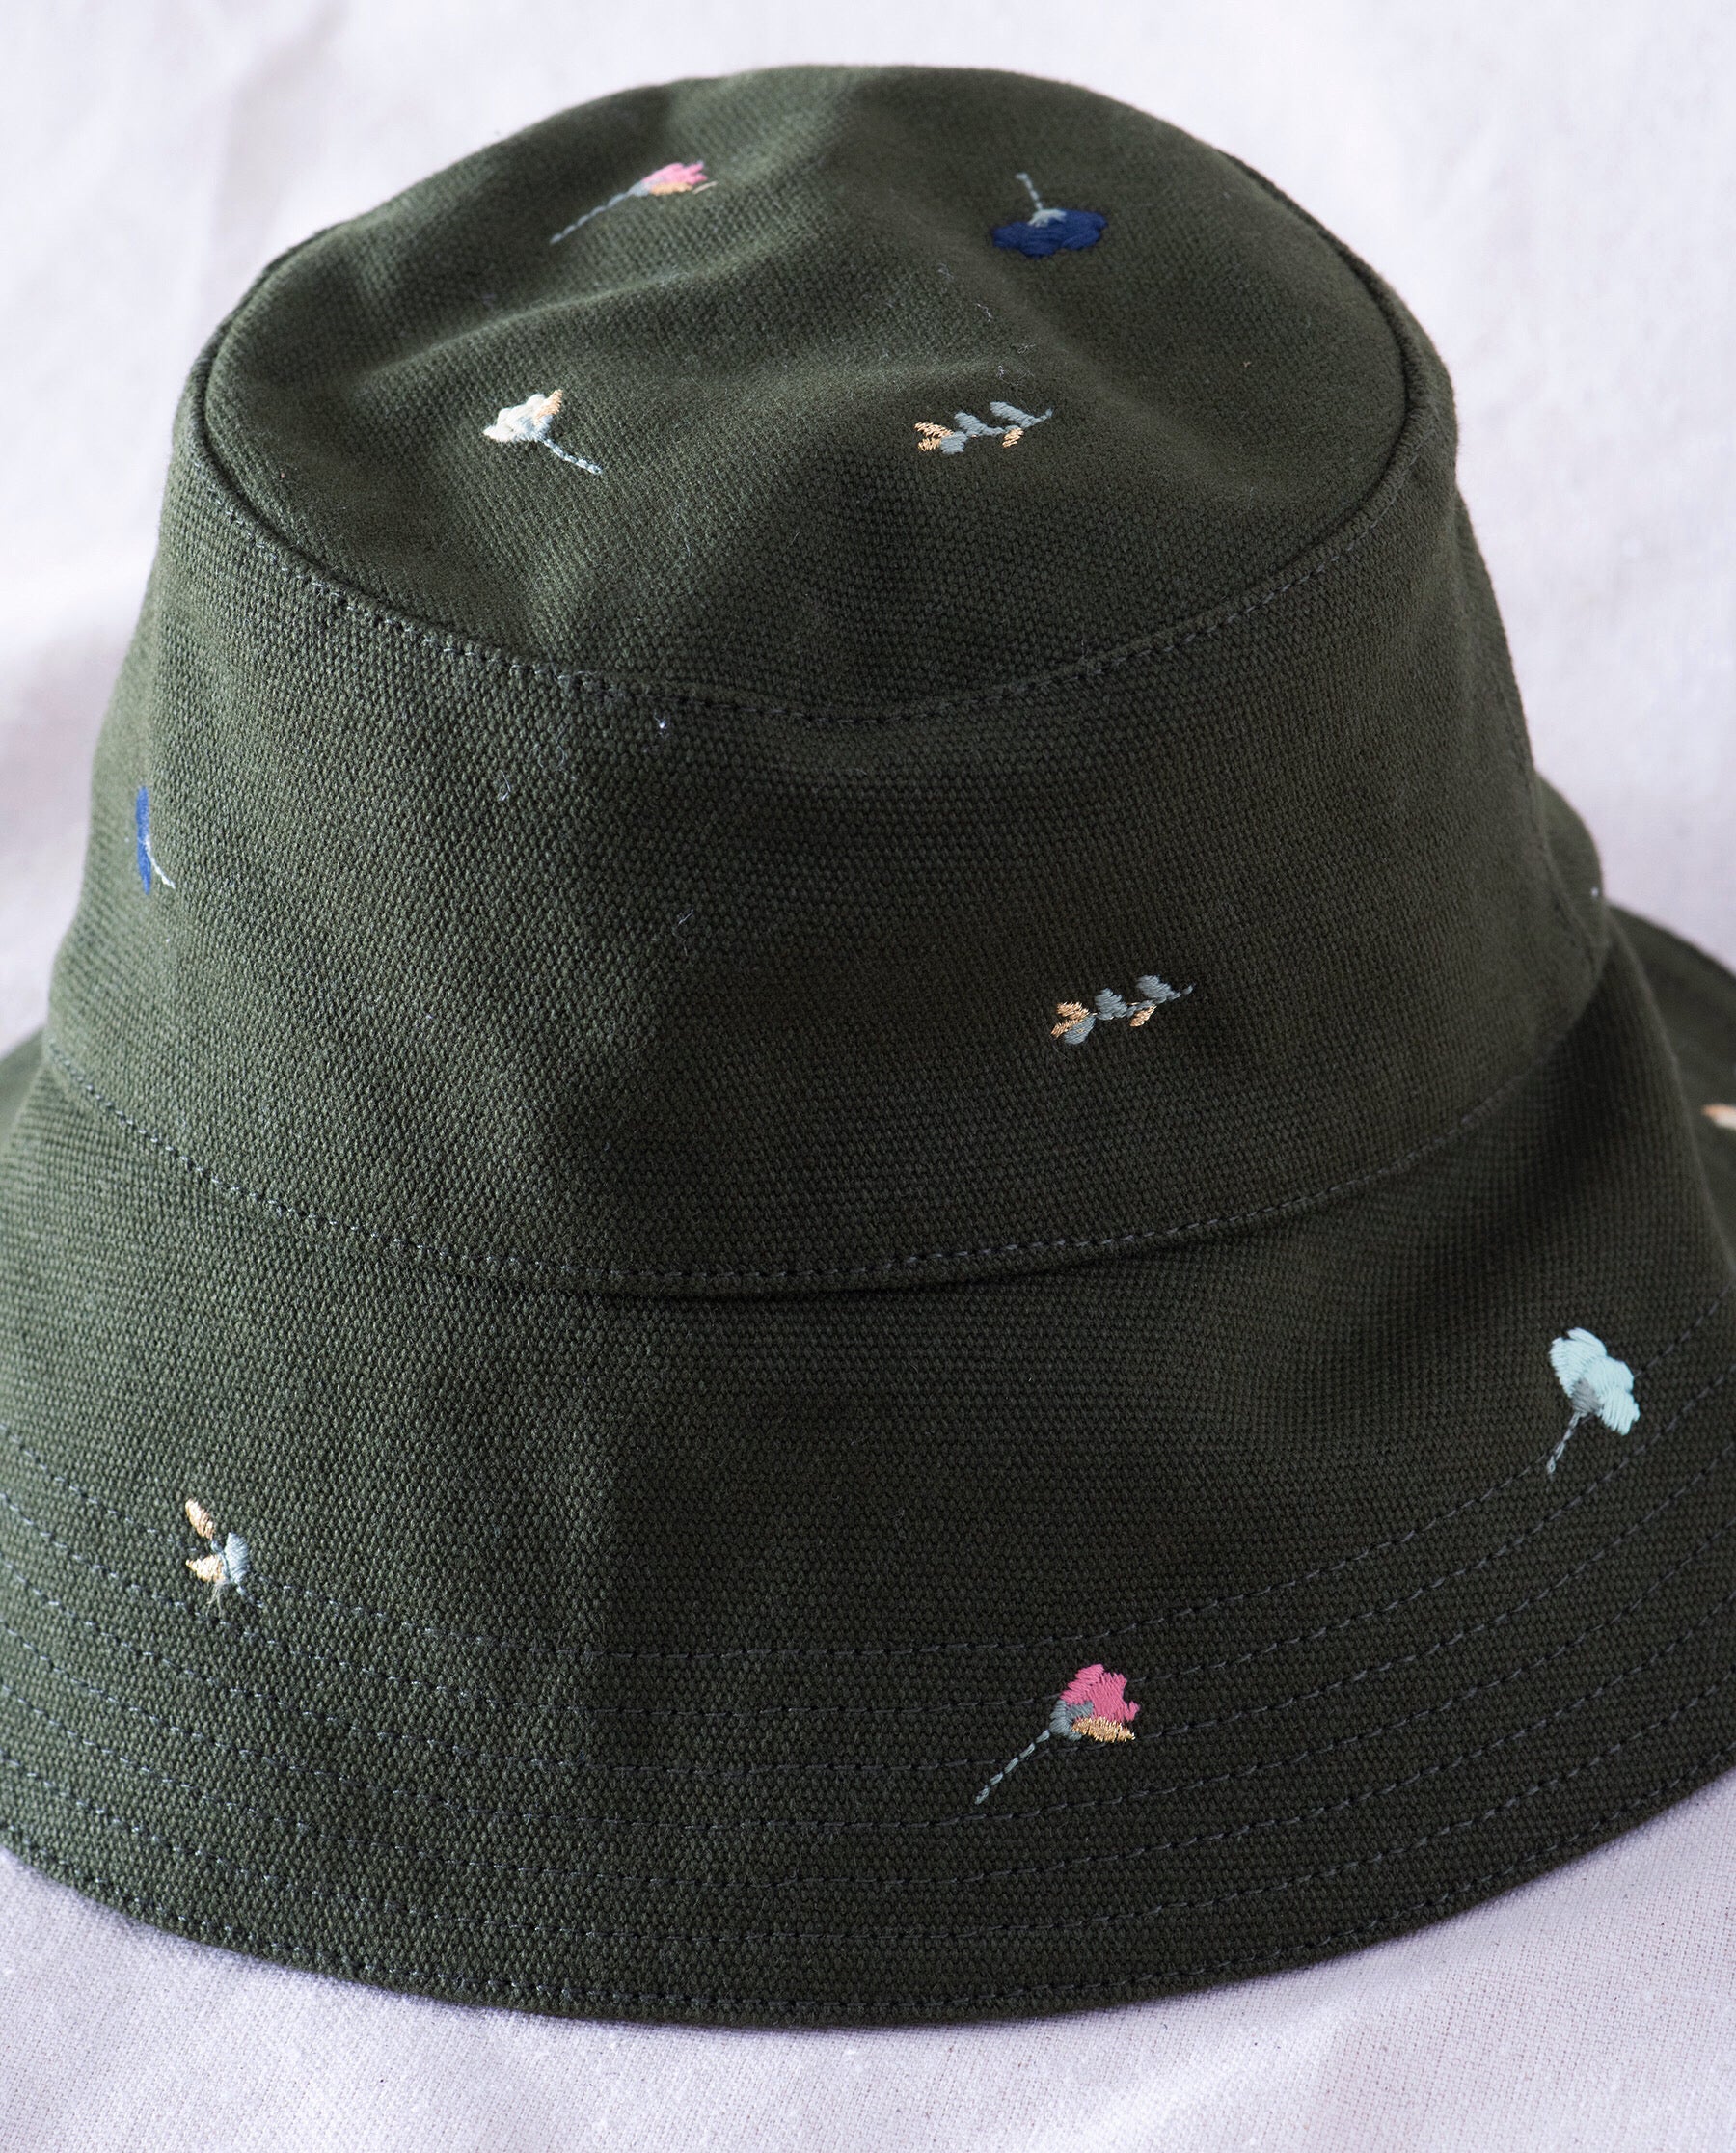 The Bucket Hat. -- Army with Tossed Floral Embroidery – The Great.